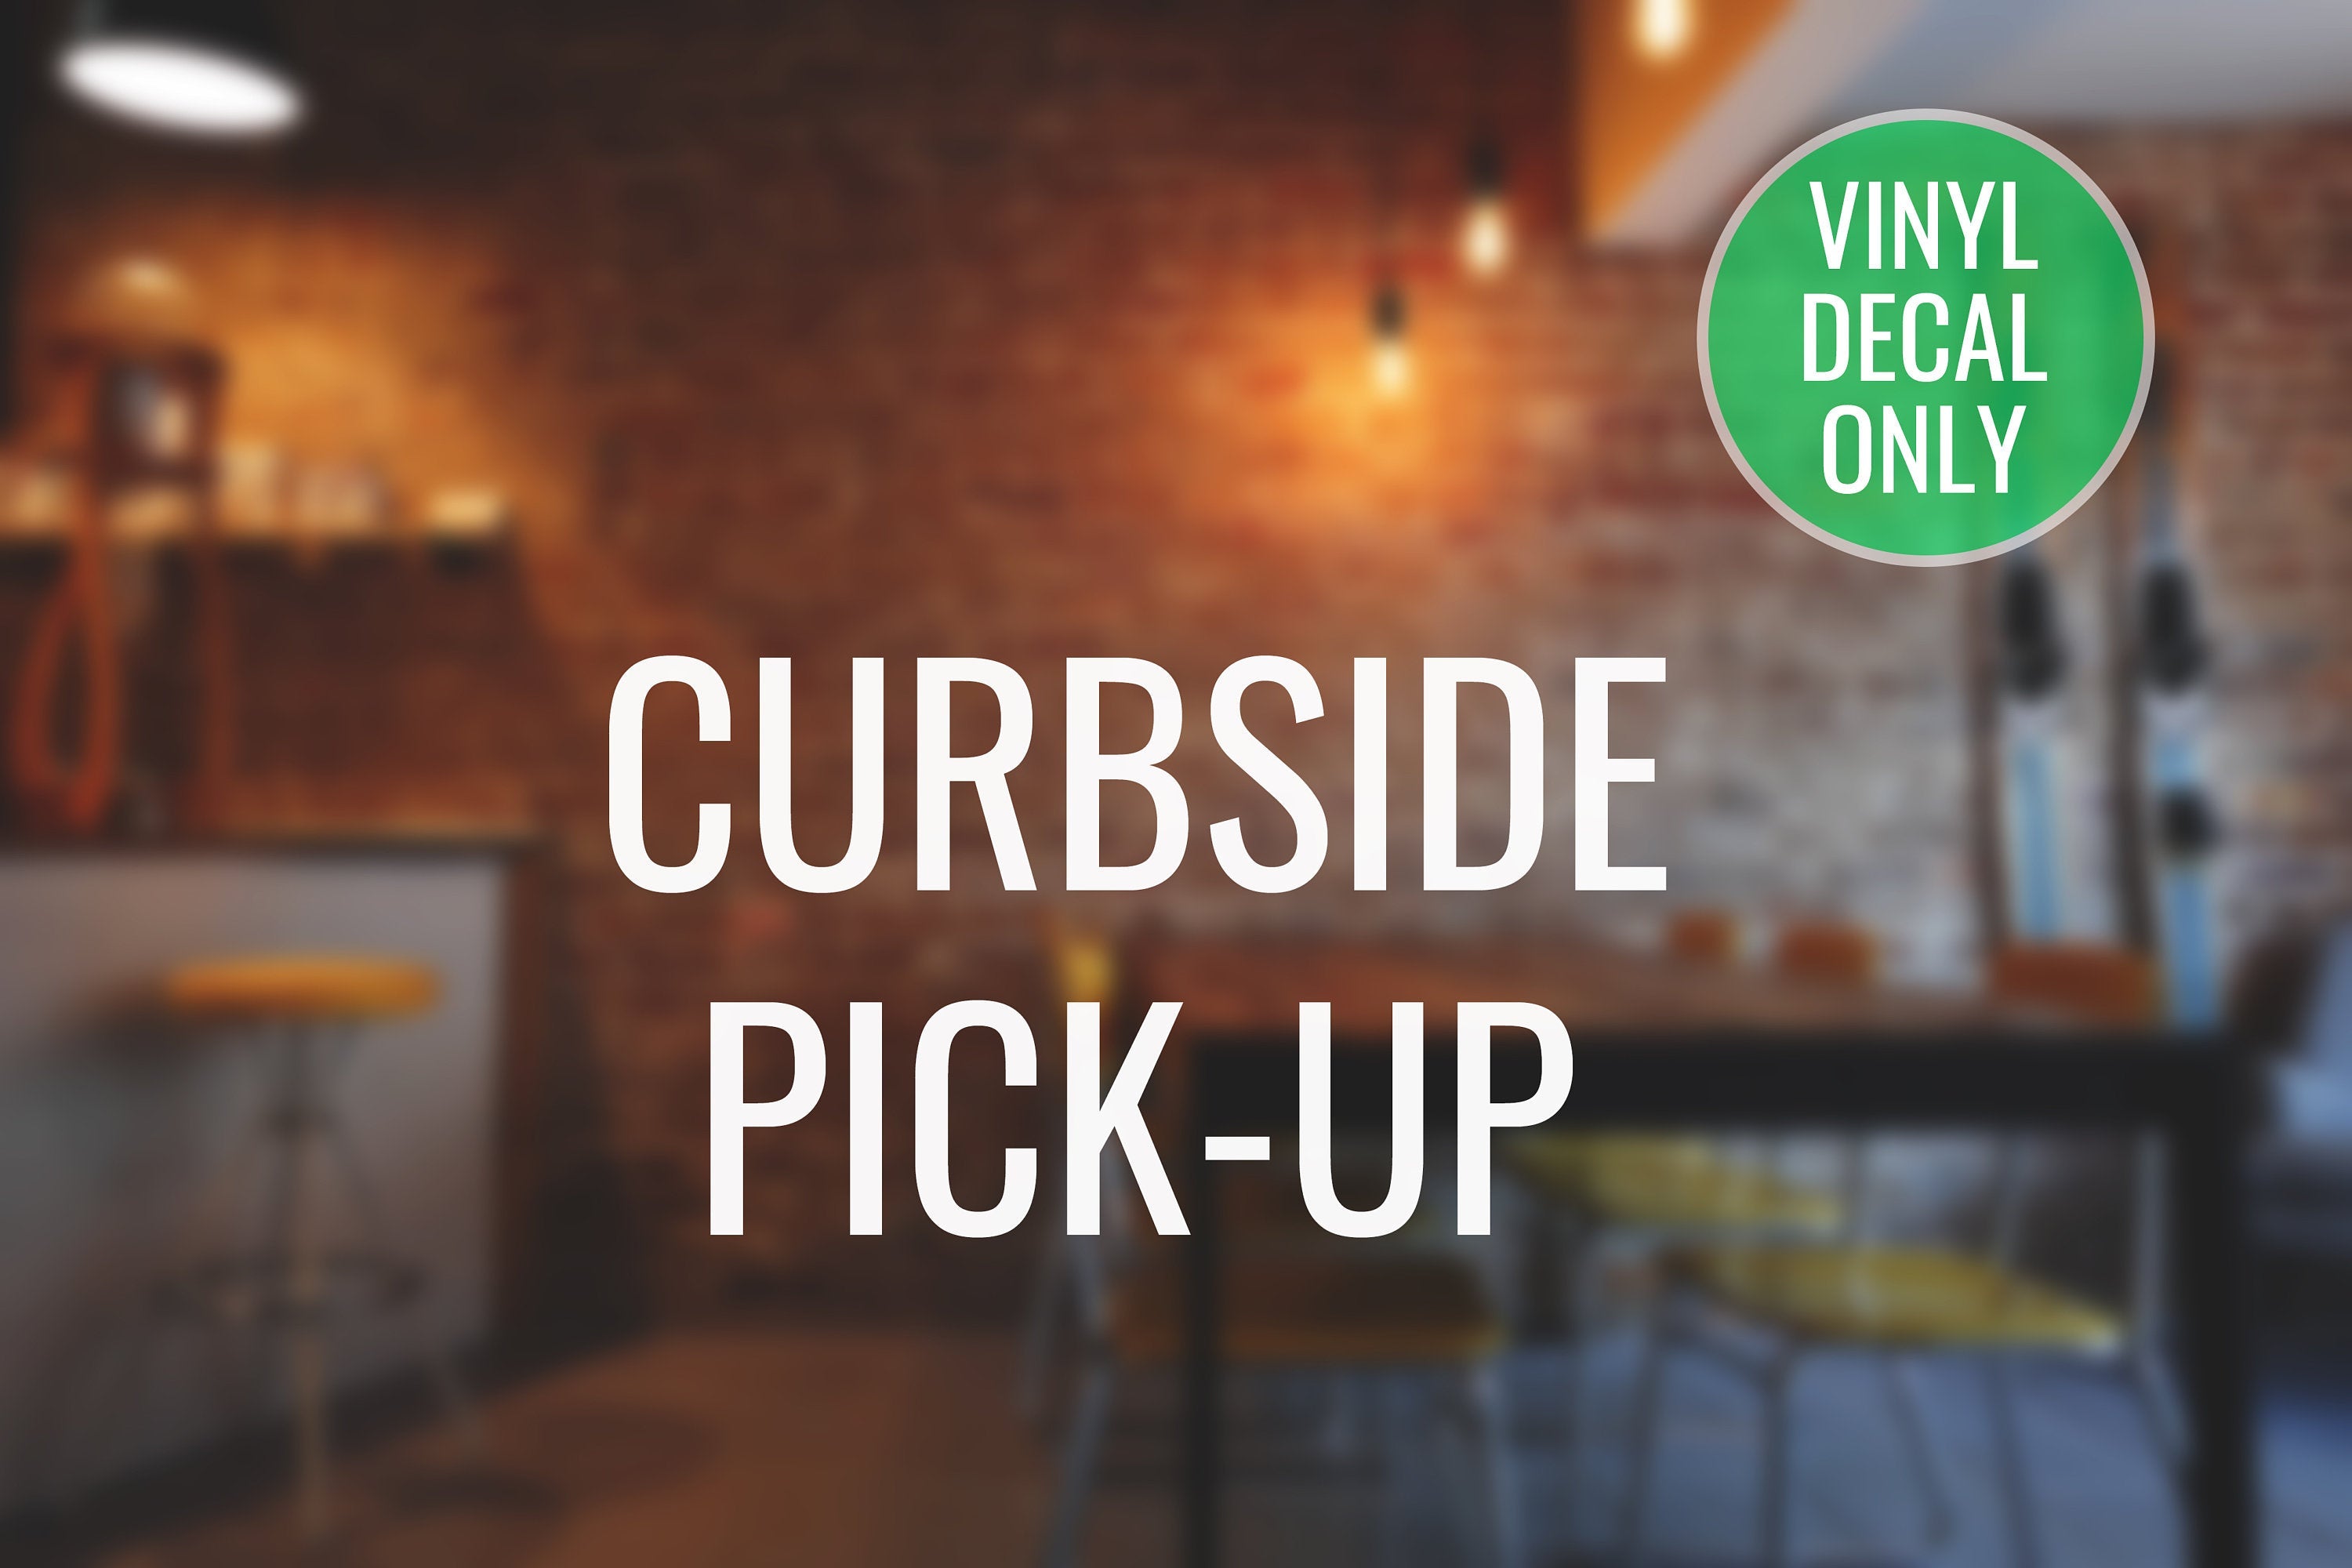 Curbside Pick-up Decal - Vinyl Sticker for Fastfood, Bar, Coffee Shops, Bistros, Eatery, Bakery, Food Truck, Grocery, Restaurants, Pickup